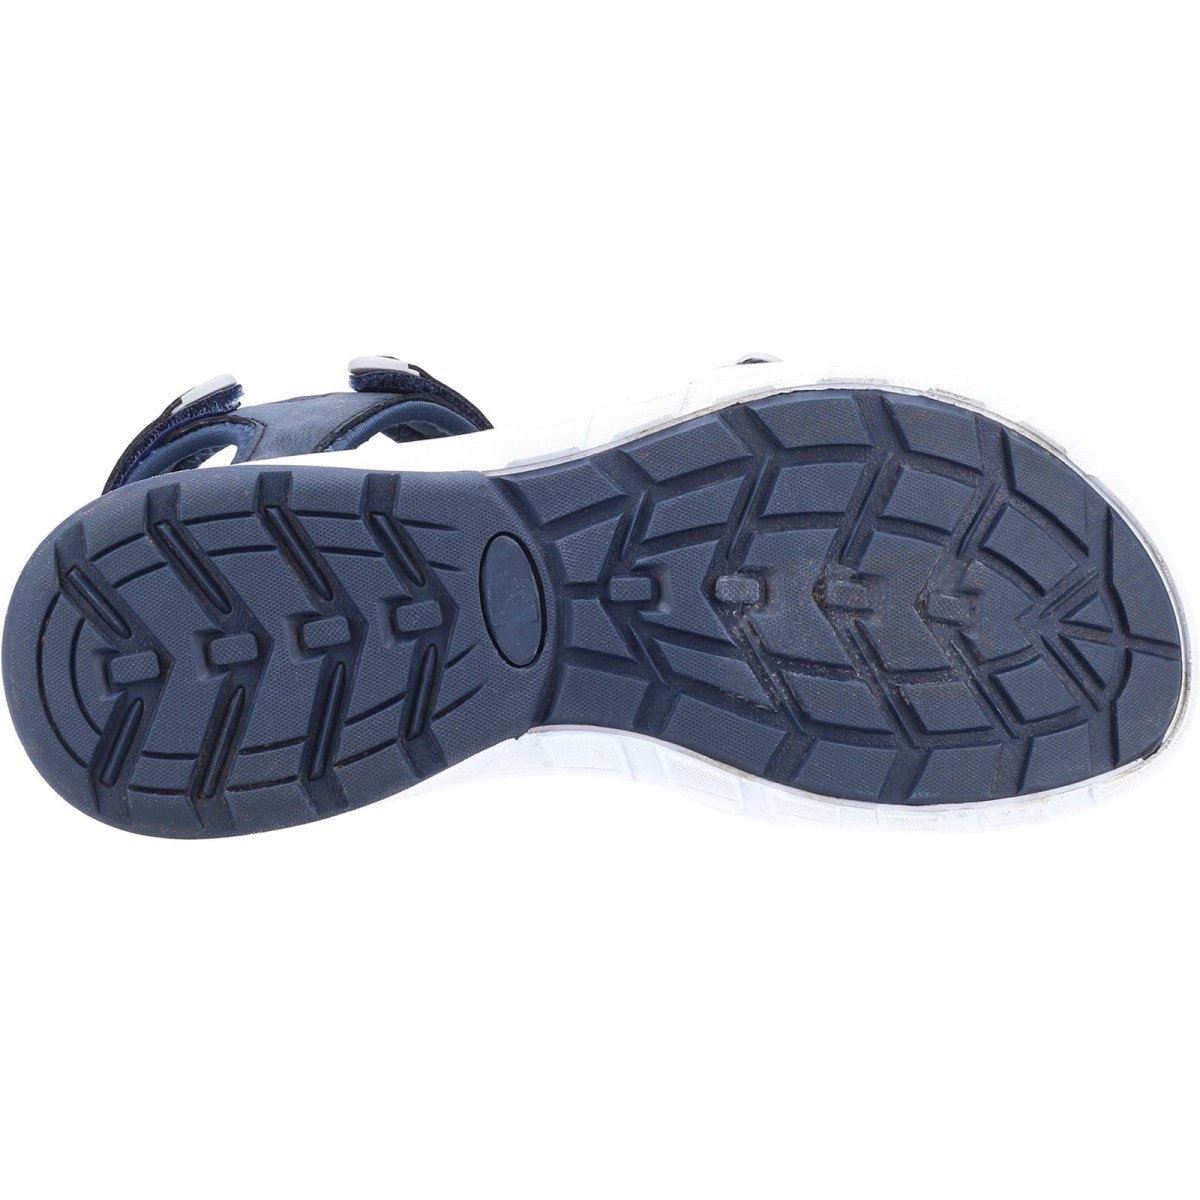 Cotswold Whiteshill Ladies Summer Recycled Sandals - Shoe Store Direct